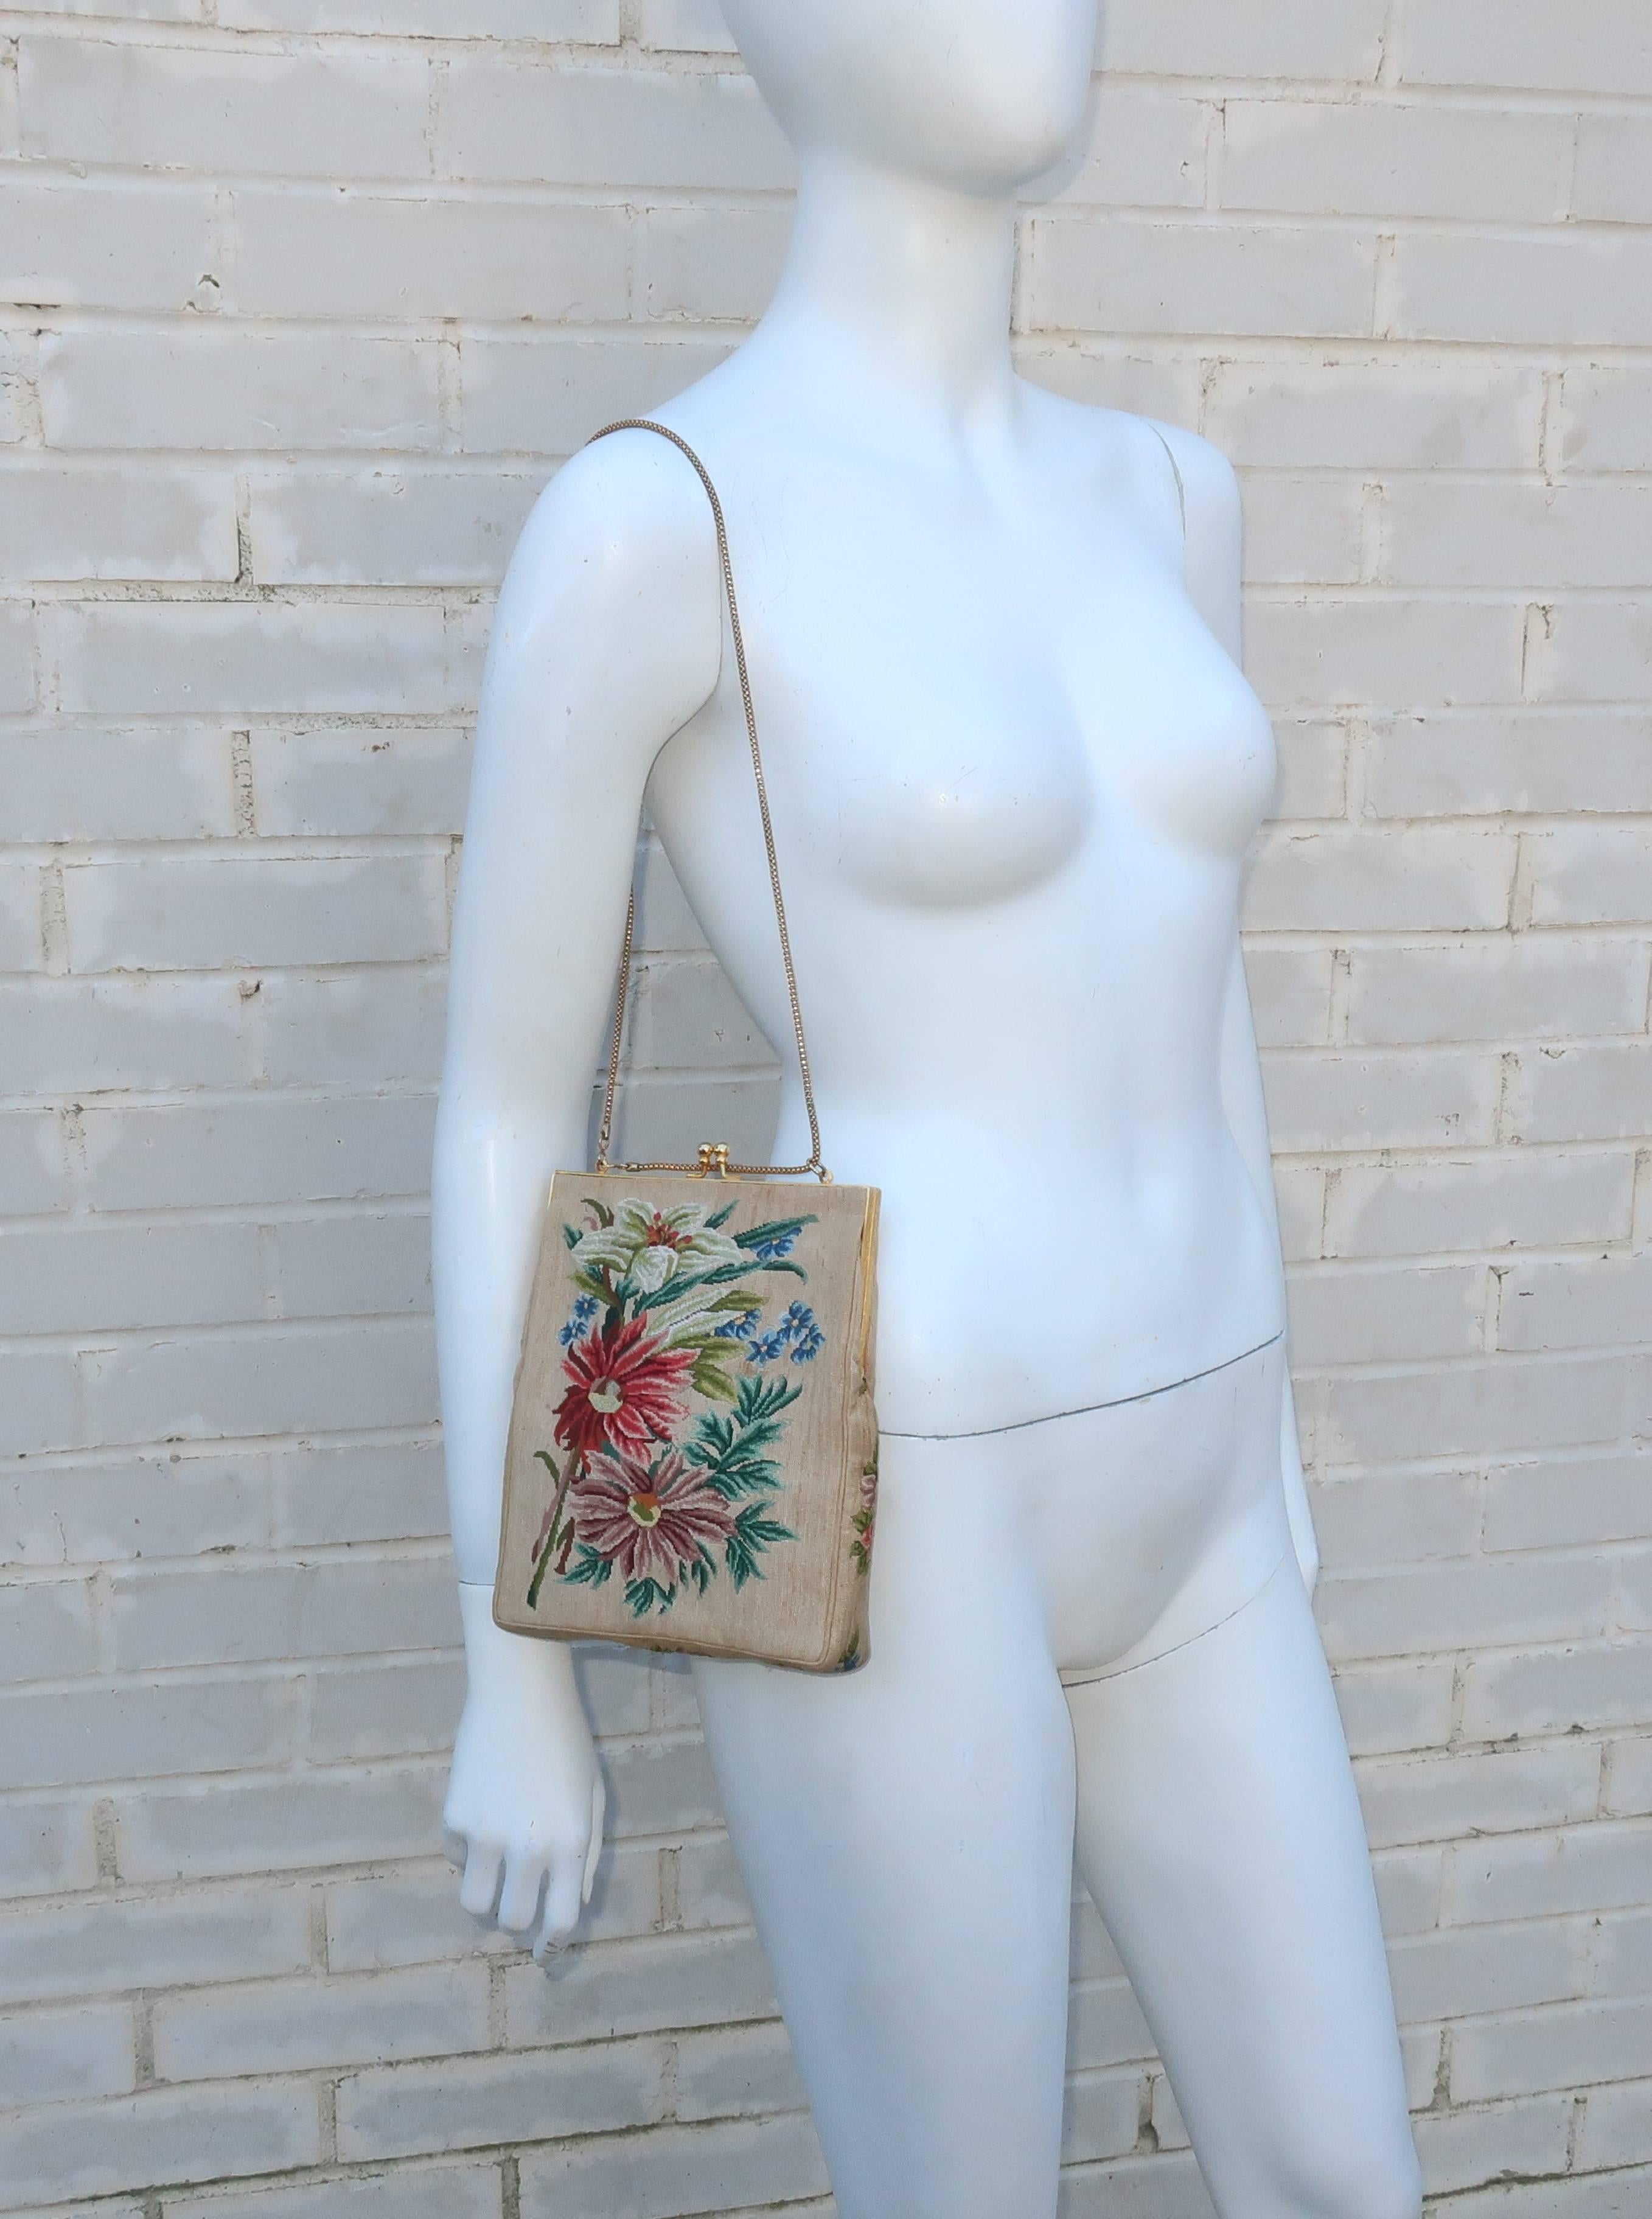 Vintage charm!  This sweet petit point handbag depicts a floral bouquet in shades of red, brown, green and blue all on a light beige background.  The gold tone metal frame is reminiscent of a trellis and the kiss lock closure opens to reveal a